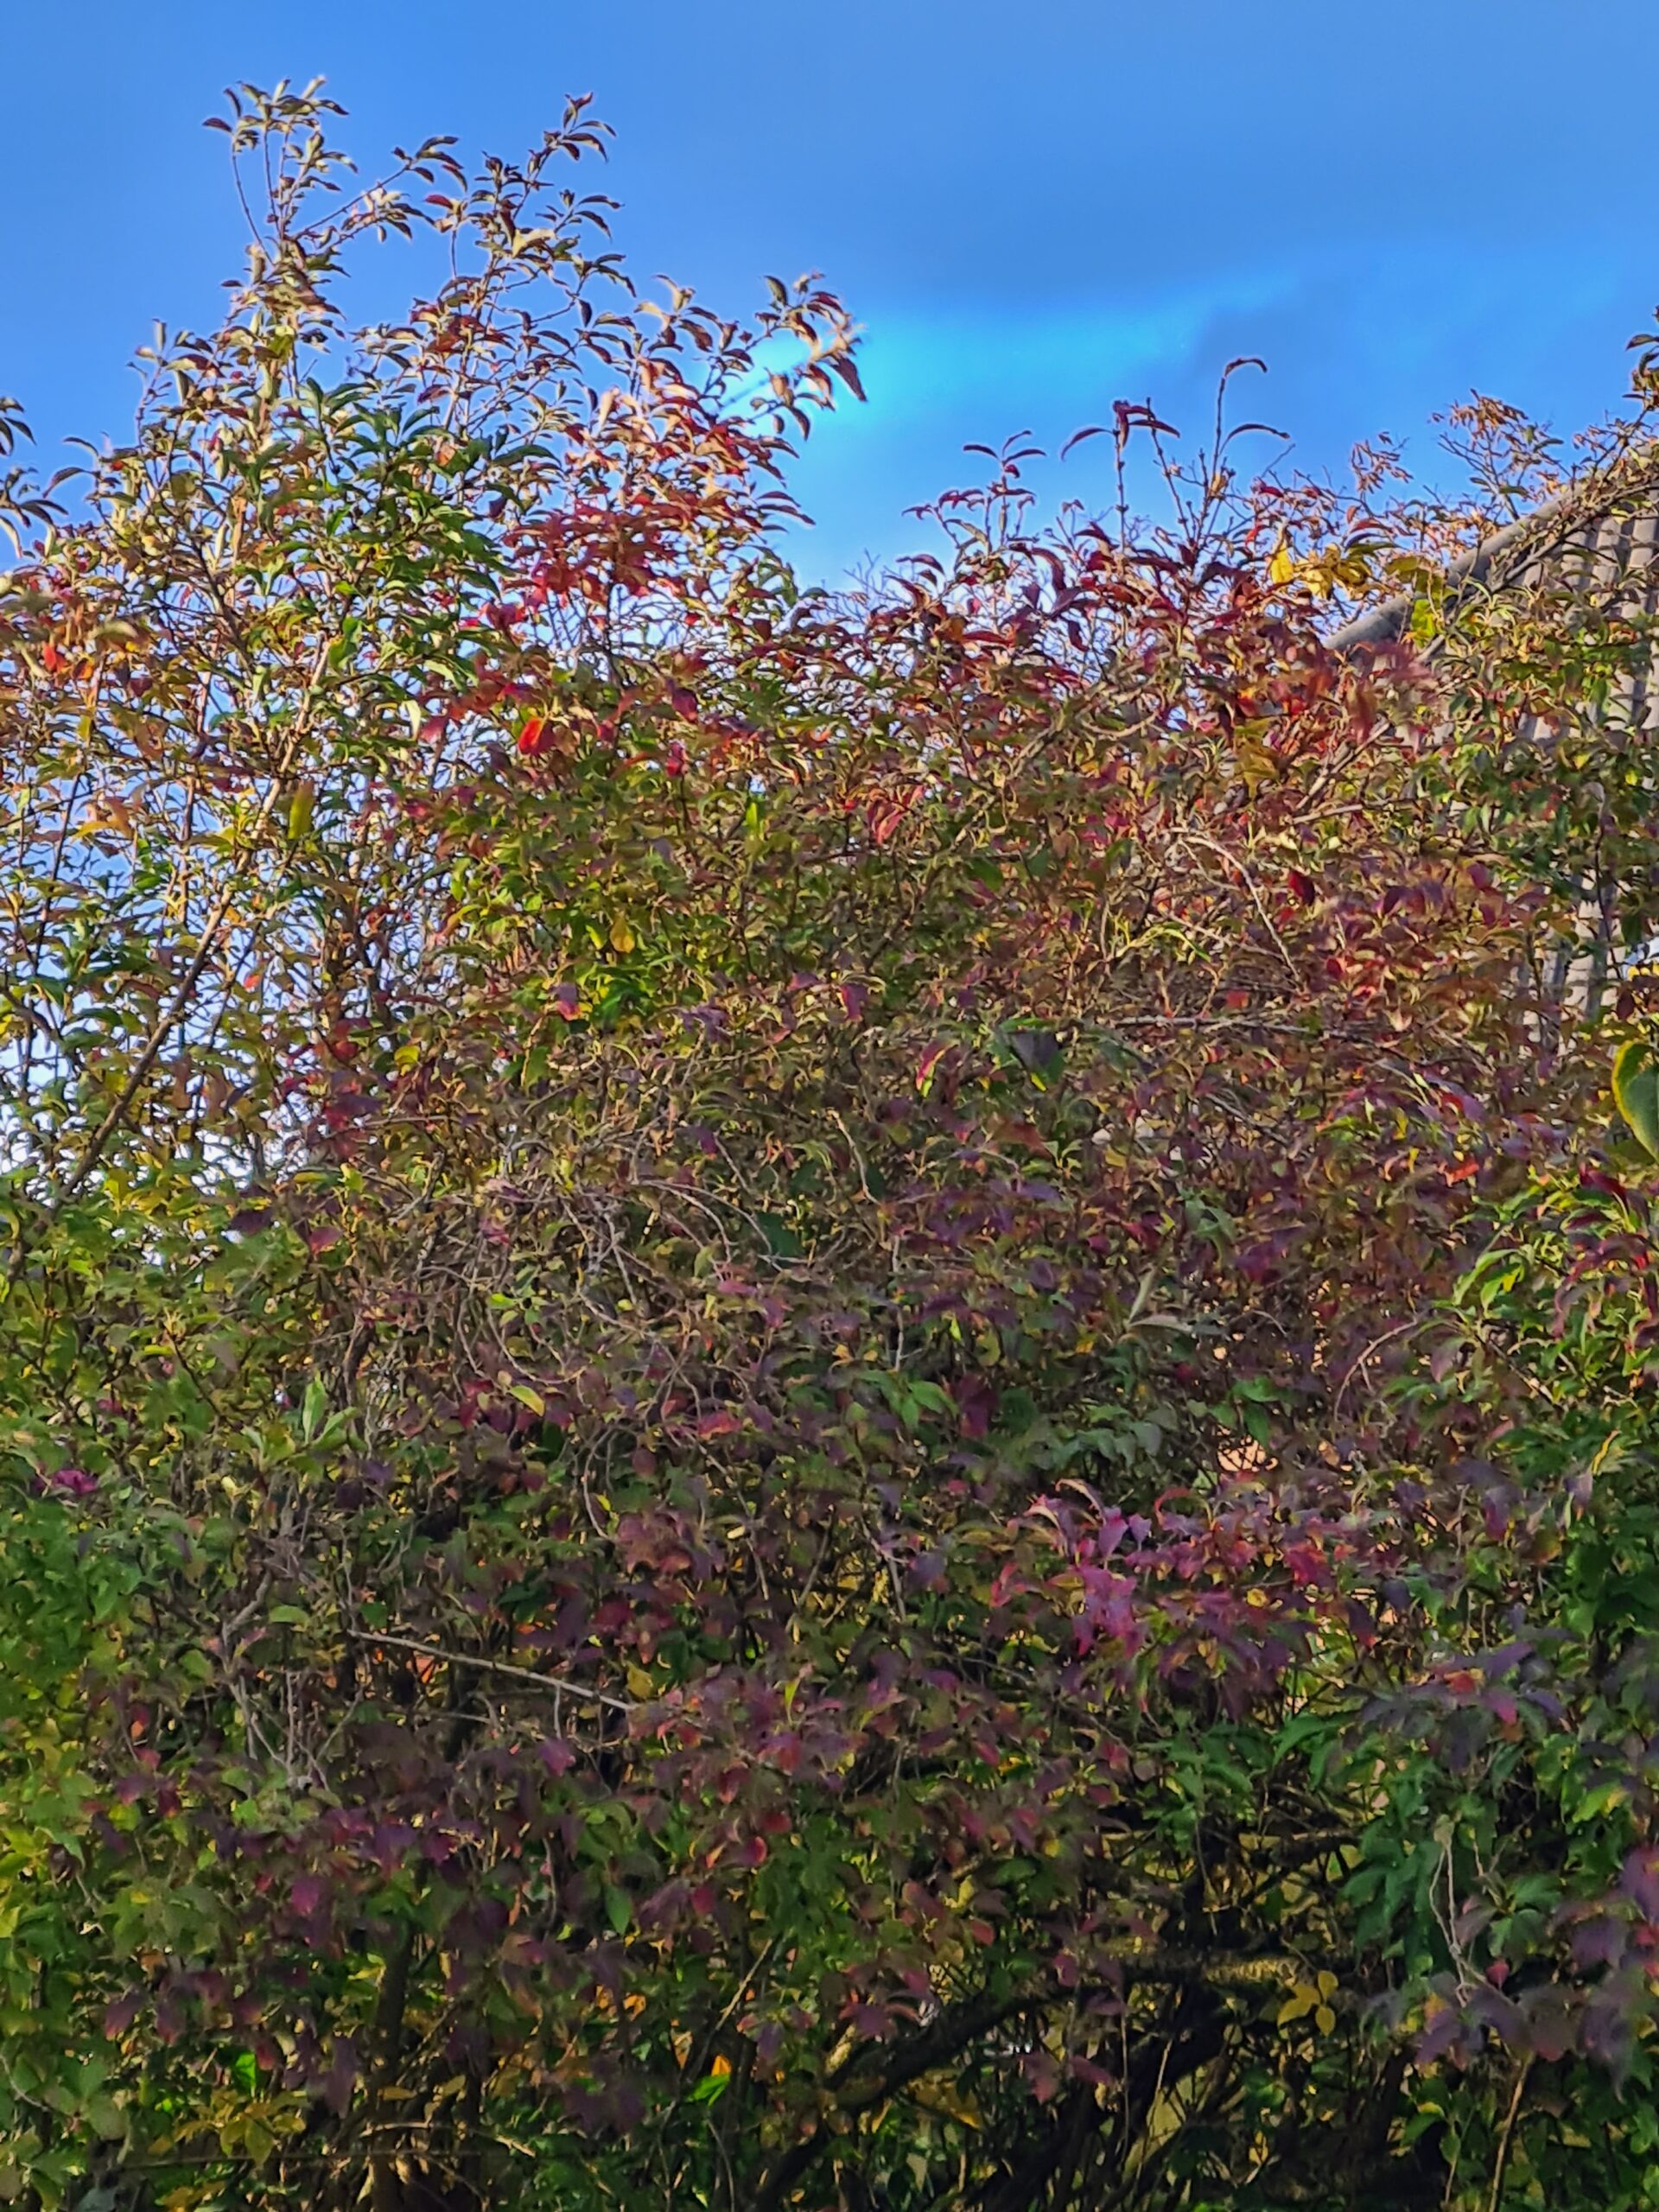 A forsythia plant in autumn/ fall with green and pinkish leaves, just before leaf fall.